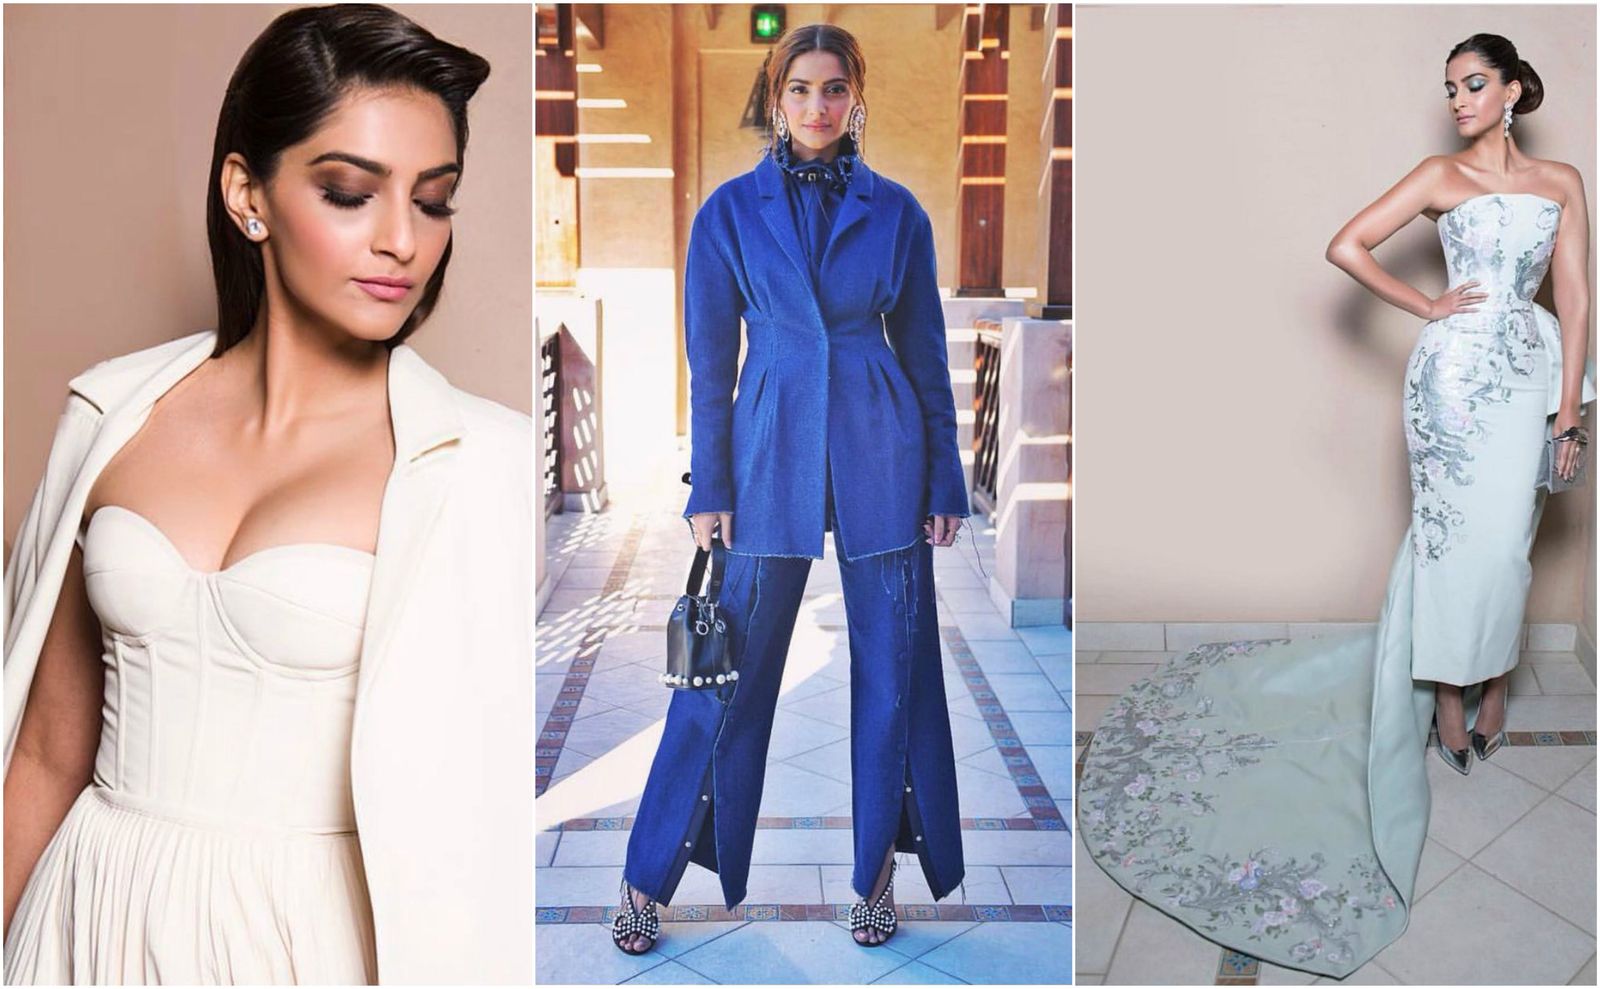 Sonam Kapoor Oozes Perfection In Her Ivory Gown And Denim On Denim Look!